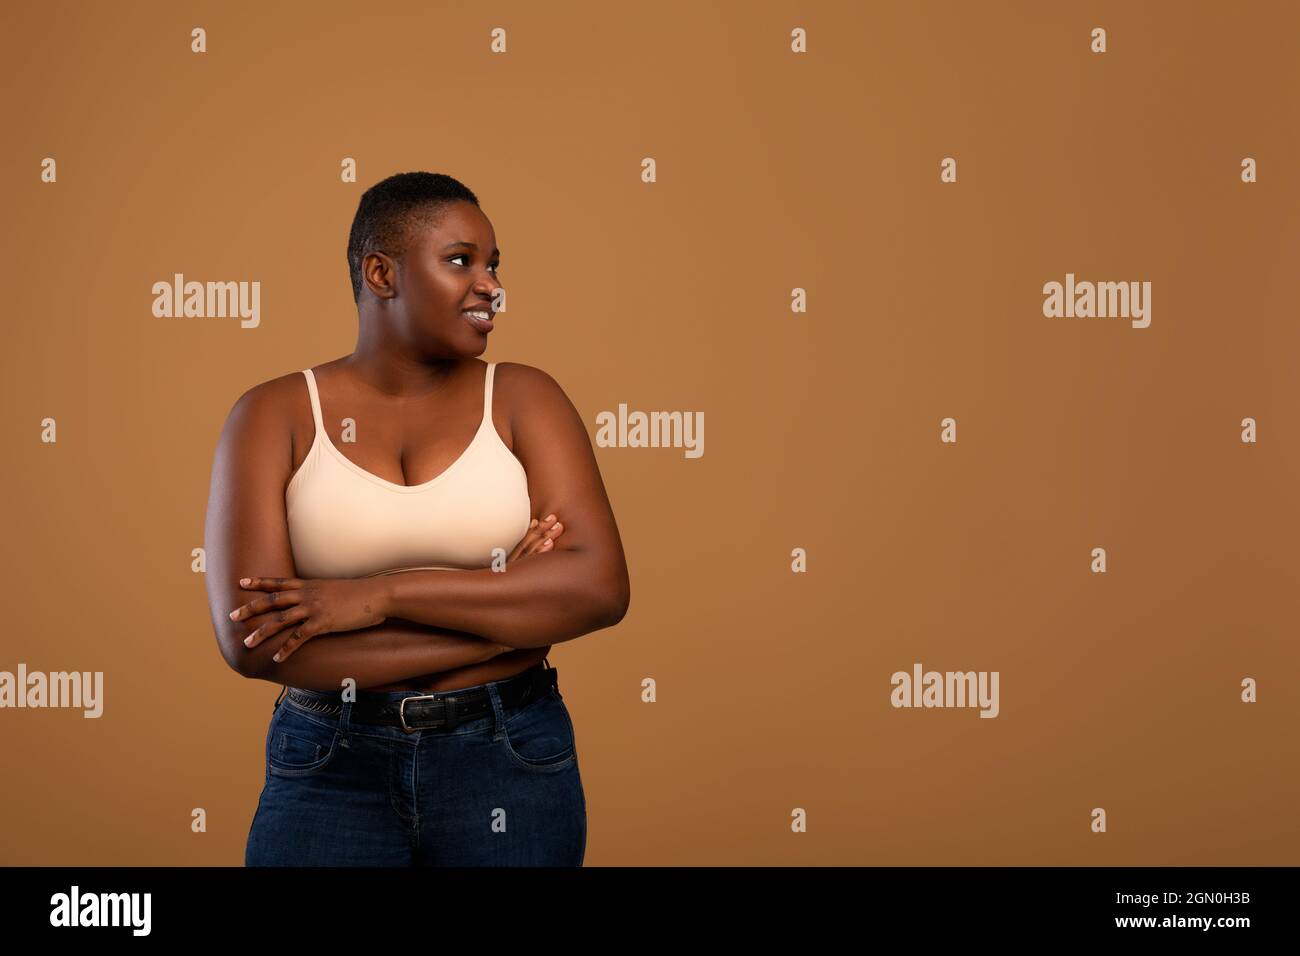 https://c8.alamy.com/comp/2GN0H3B/portrait-of-smiling-young-curvy-african-american-woman-standing-with-folded-hands-looking-wearing-bra-and-jeans-looking-aside-at-free-copy-space-isola-2GN0H3B.jpg